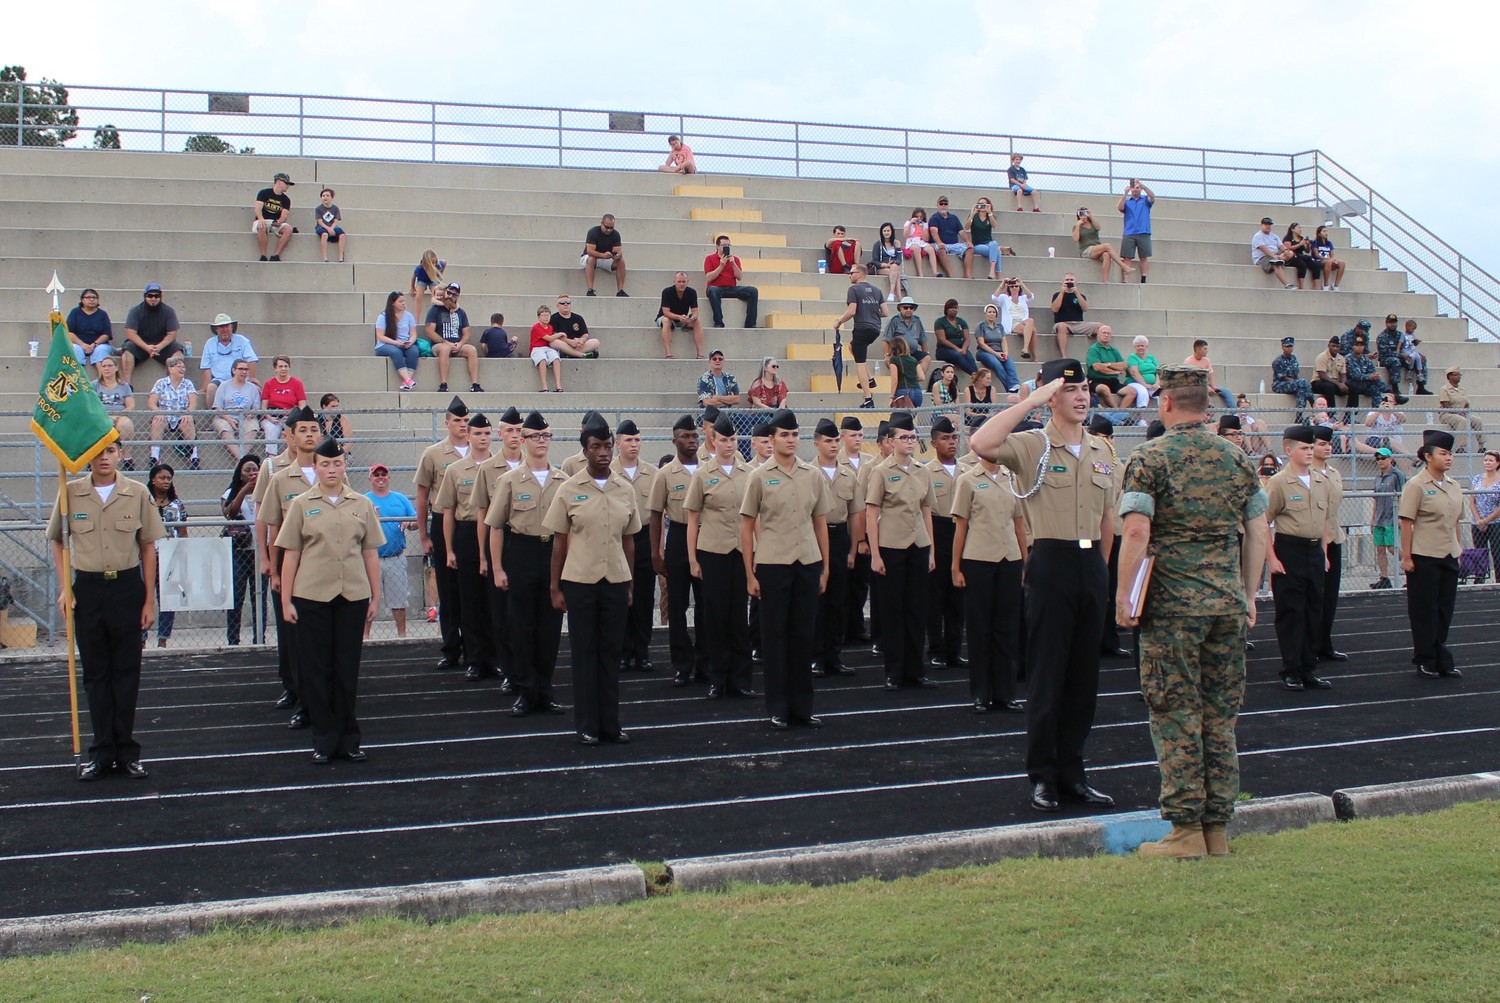 Cadet Mac Davis leads Nease NJROTC during the Personnel Inspection event as active duty Marine Corps and Navy non-commissioned officers prepare to inspect the cadets.